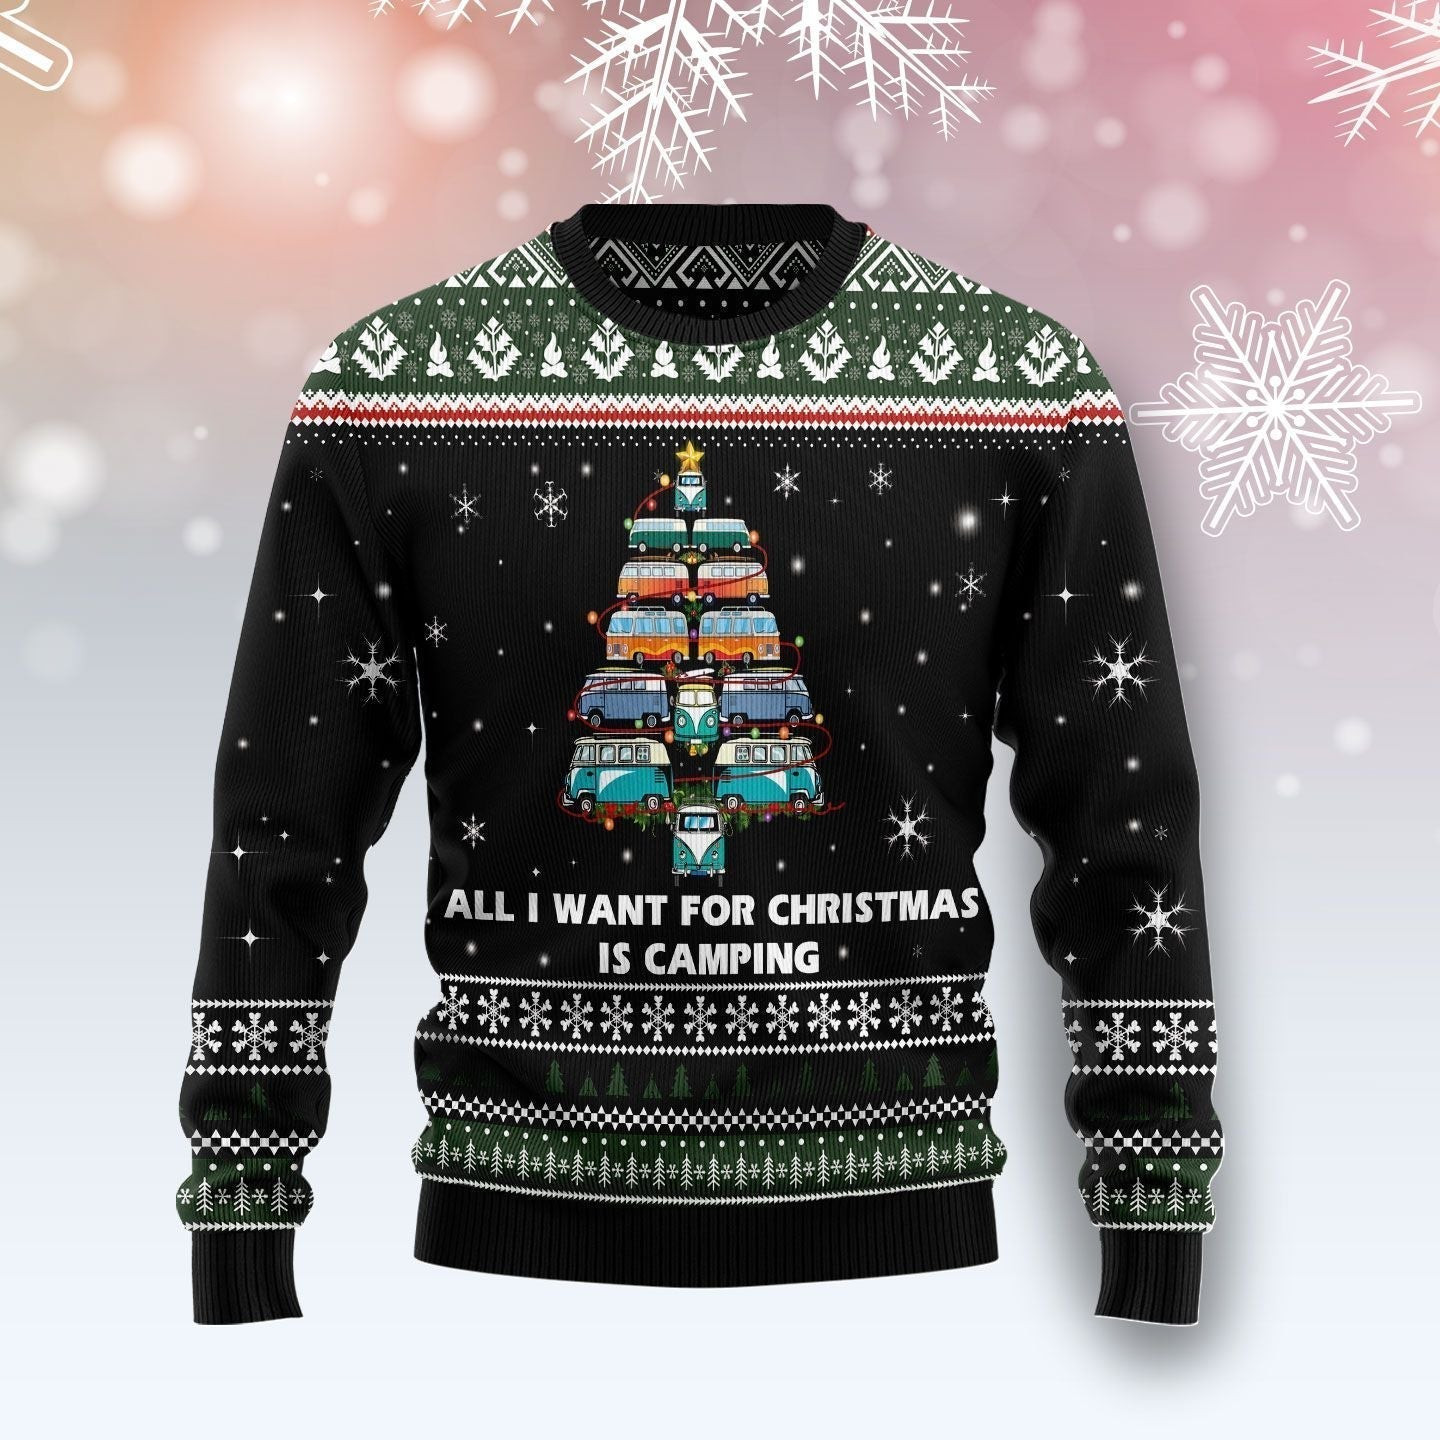 All I Want For Christmas Is Camping Ugly Christmas Sweater Ugly Sweater For Men Women, Holiday Sweater